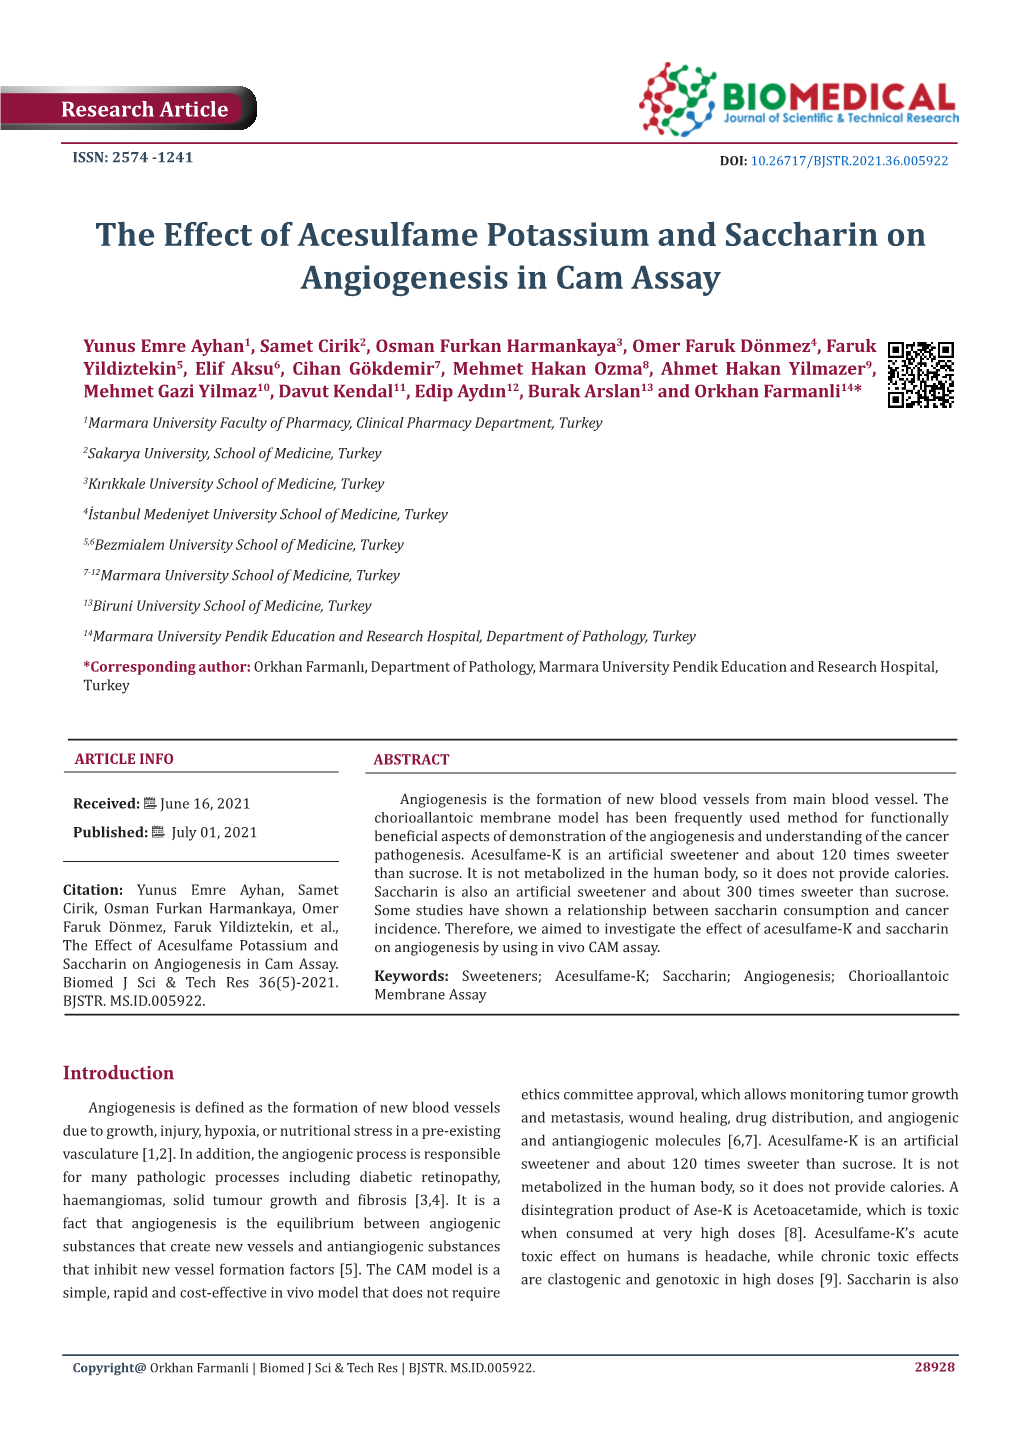 The Effect of Acesulfame Potassium and Saccharin on Angiogenesis in Cam Assay